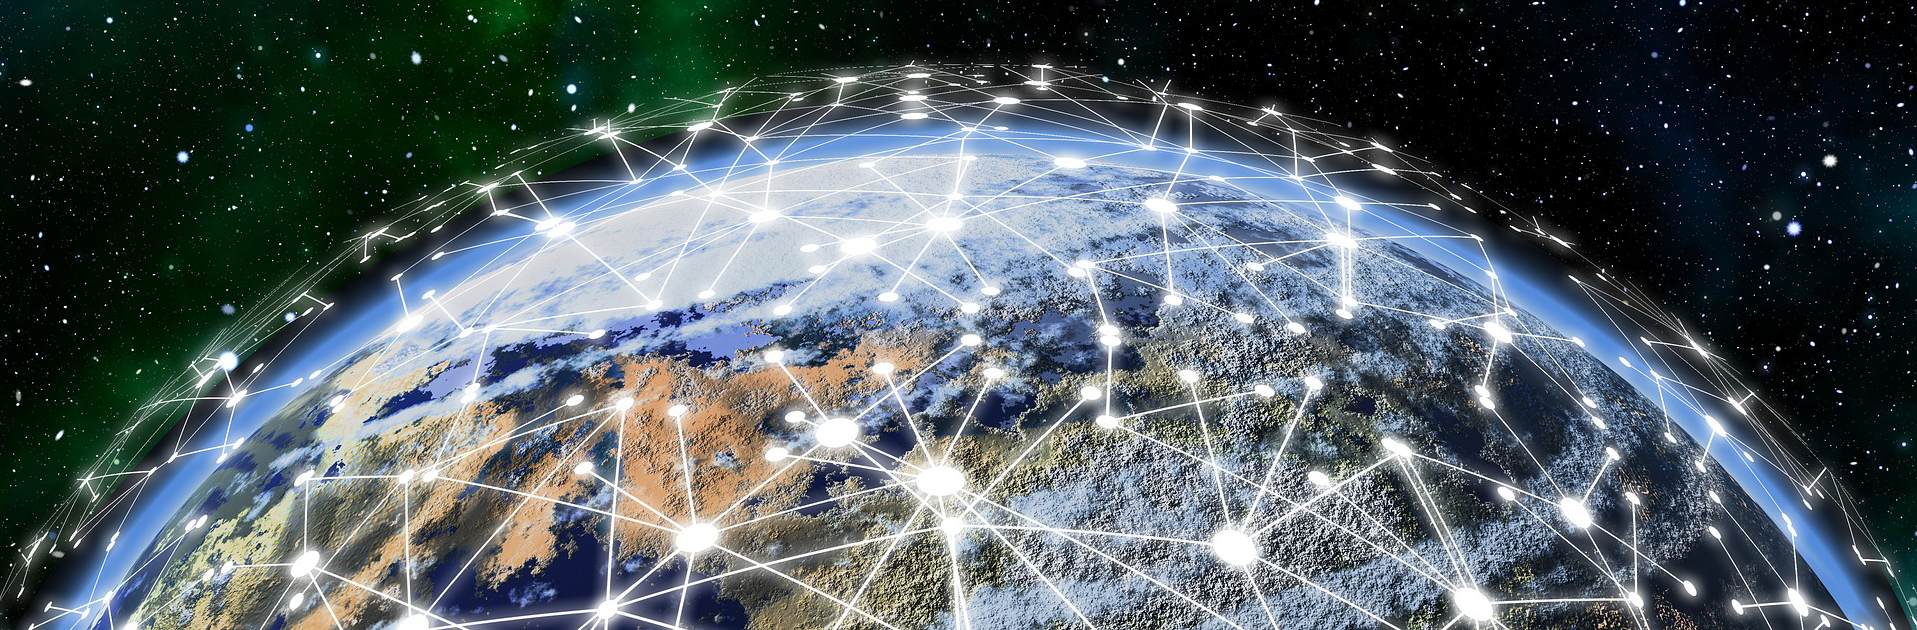 Network of lights spanning the world